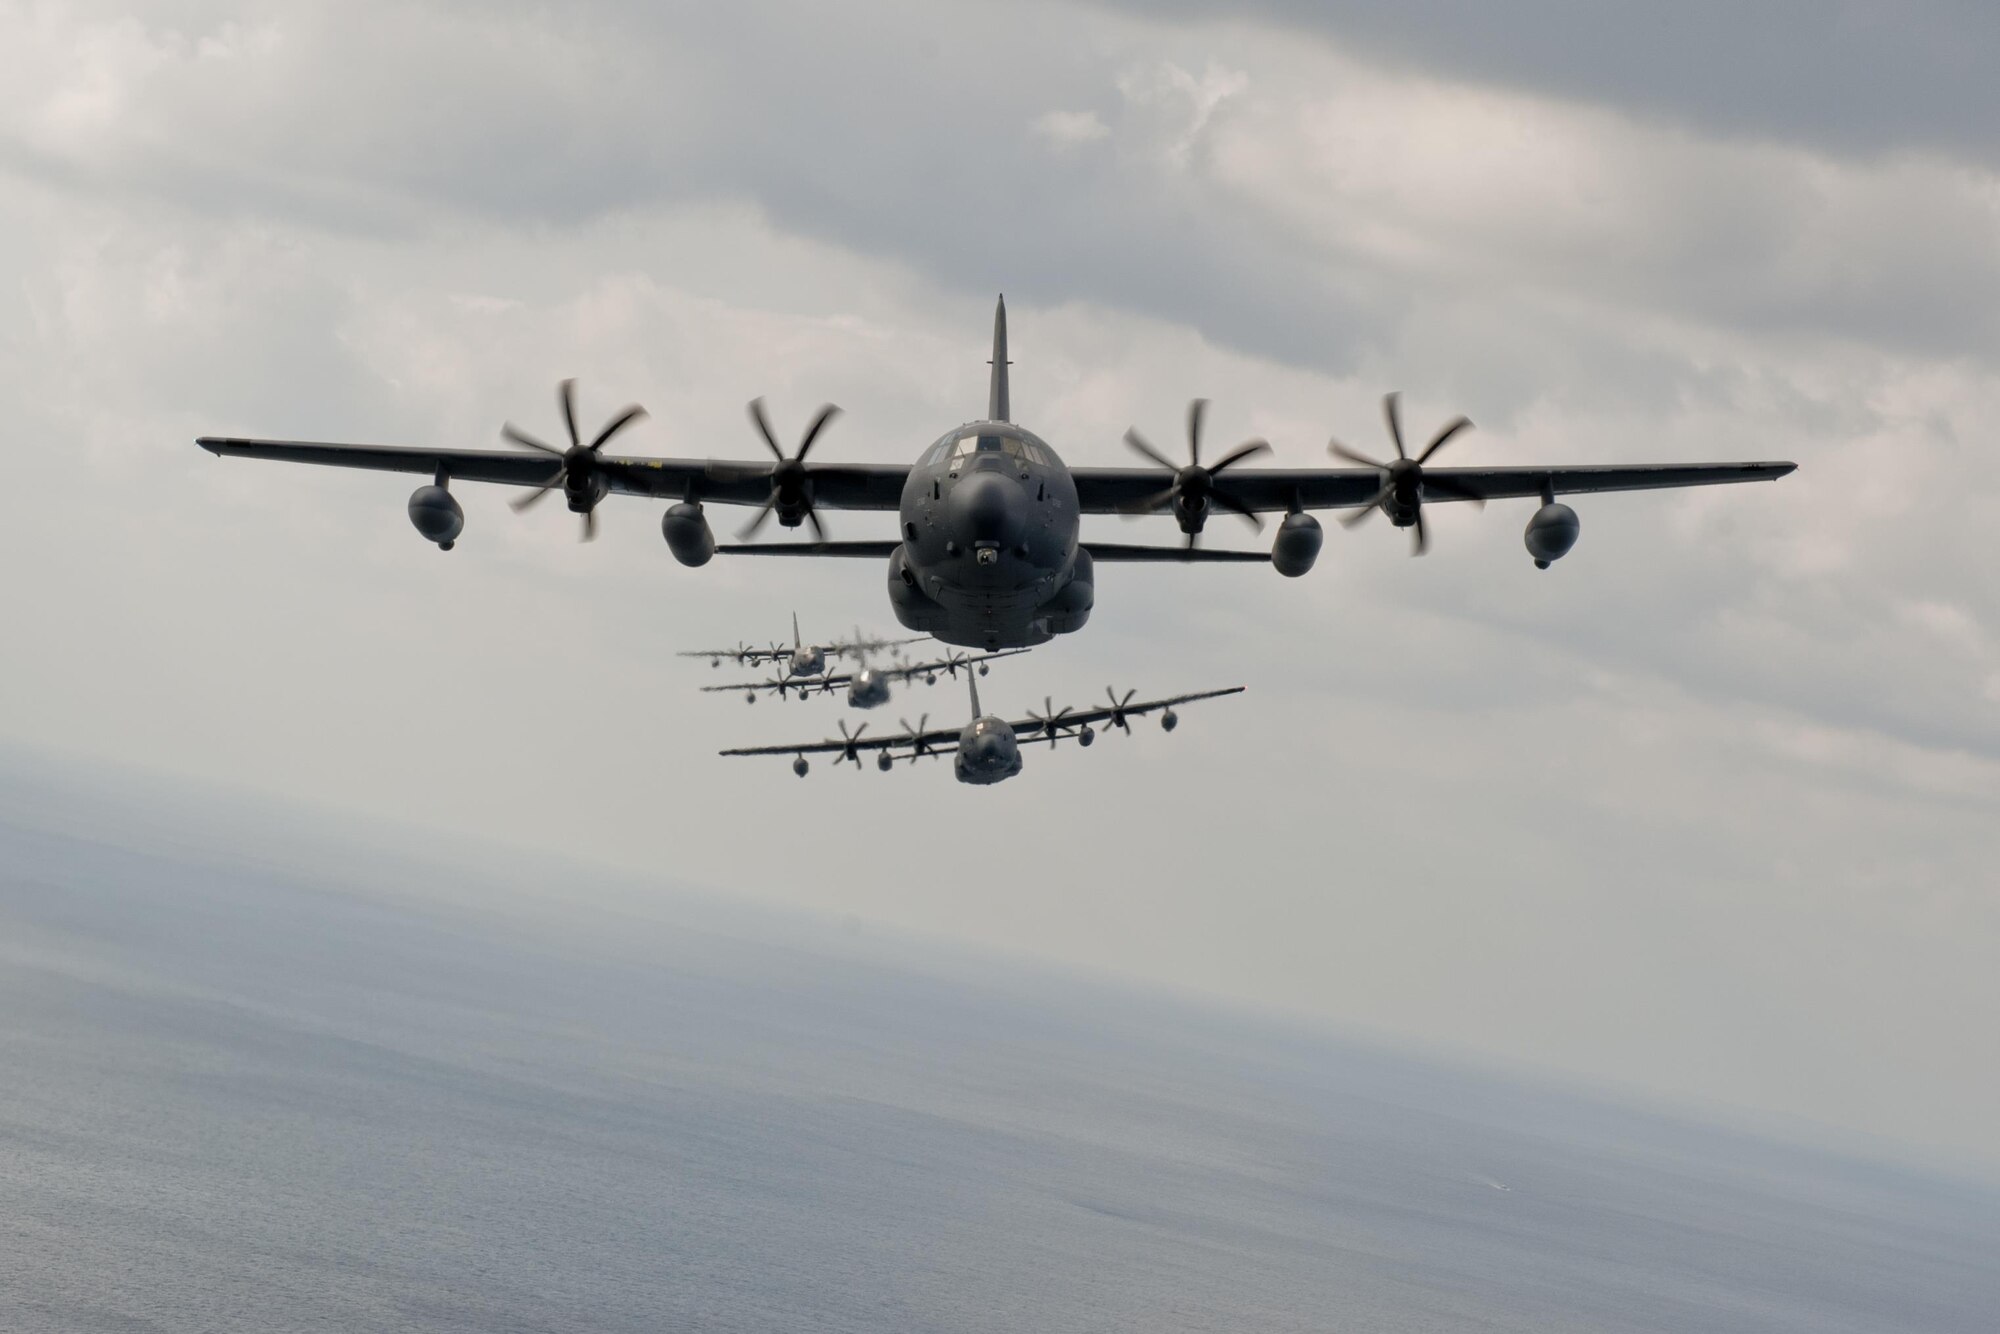 U.S. Air Force MC-130J Command IIs assigned to the 17th Special Operations Squadron fly in formation Feb. 17, 2016, off the coast of Okinawa, Japan. The 17th SOS conducted a unit-wide training exercise which tasked the entire squadron with a quick-reaction, full-force sortie involving a five-ship formation flight, cargo drops, short runway landings and takeoffs, and helicopter air-to-air refueling. (U.S. Air Force photo by Senior Airman Peter Reft/Released)